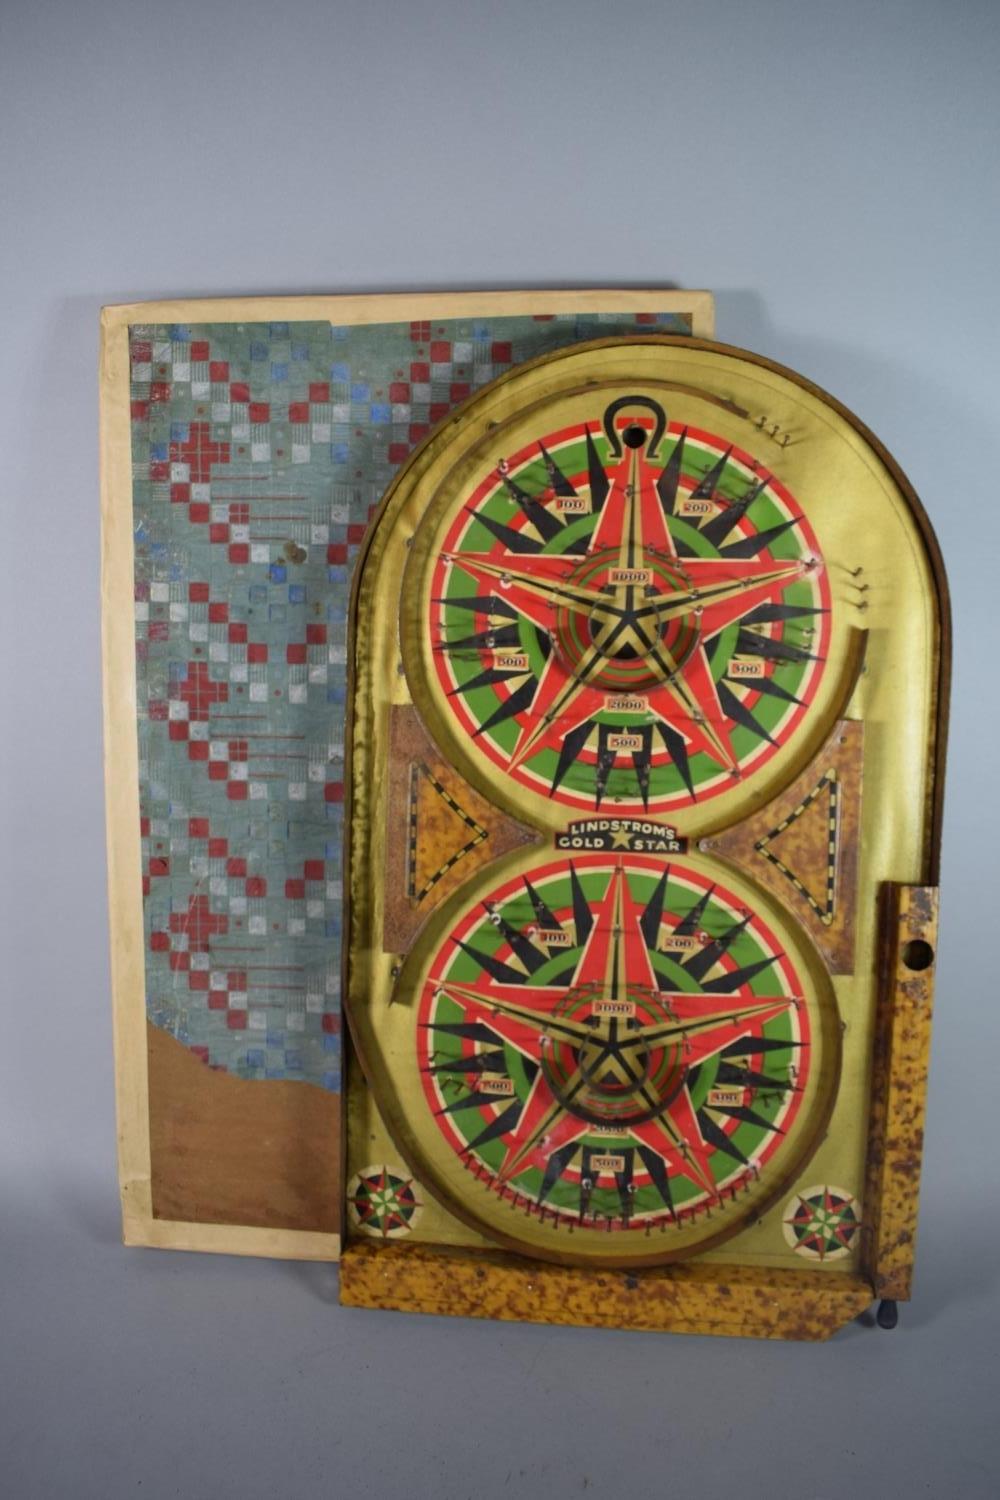 A Vintage American Tin Plate Bagatelle Game, 'Gold Star' by Lindstrom. Instructions Verso. 60.5cm. - Image 3 of 3